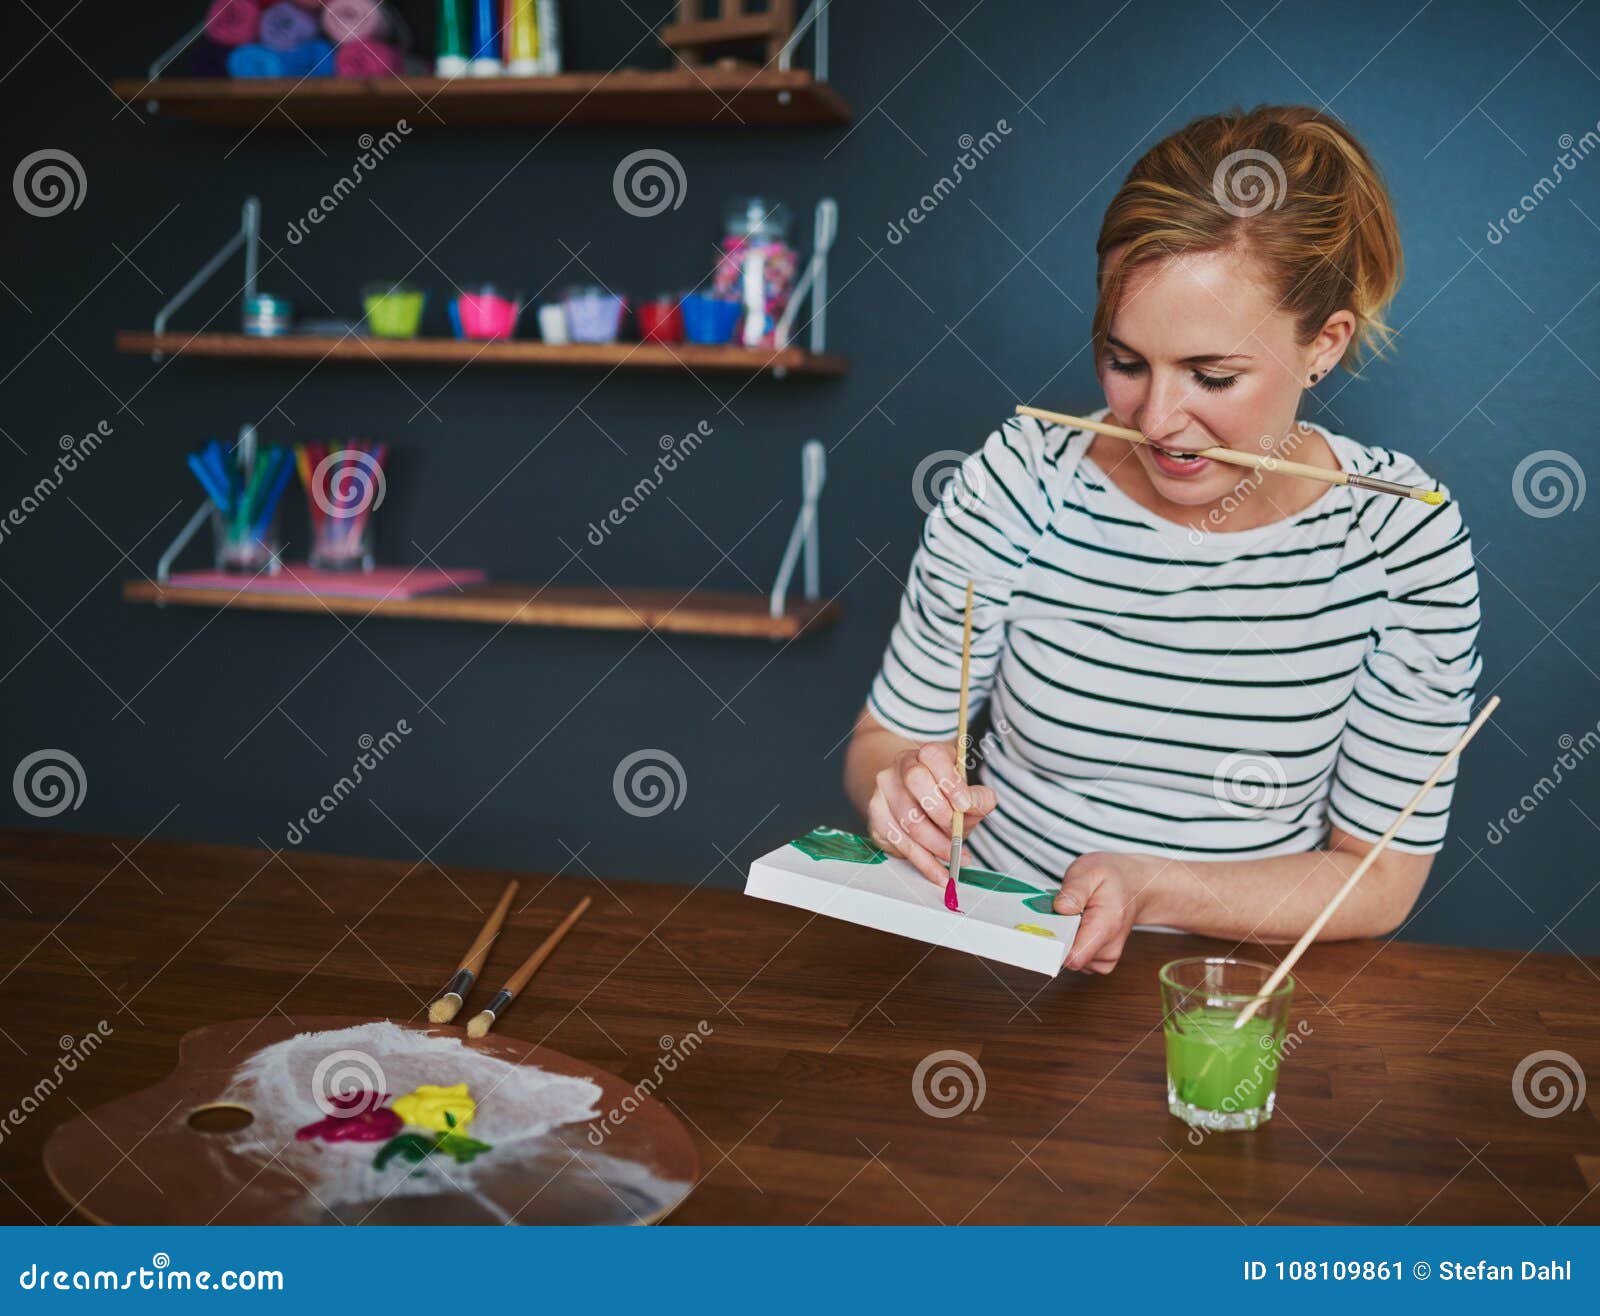 Woman Making a Painting. Happy Stock Image - Image of attractive ...